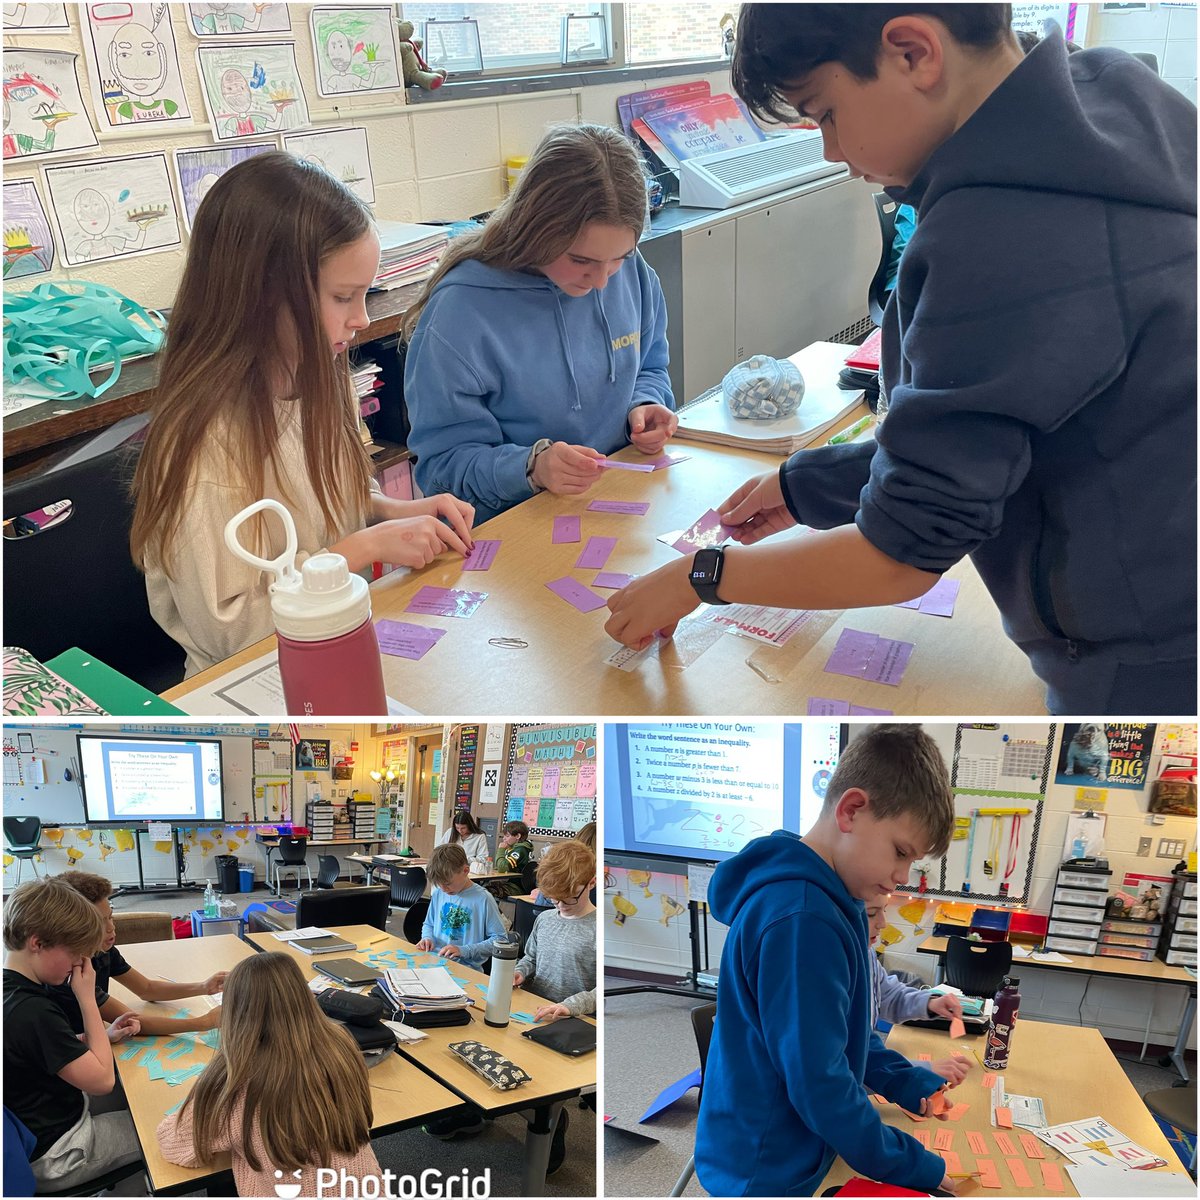 Wonderful to be back in the classroom 🥰. Great lesson introducing inequalities and watching the kiddos work together sorting and matching. #d70shinyapple #6thgrademath @HighlandD70 @LibertyvilleD70 #inequalitysort